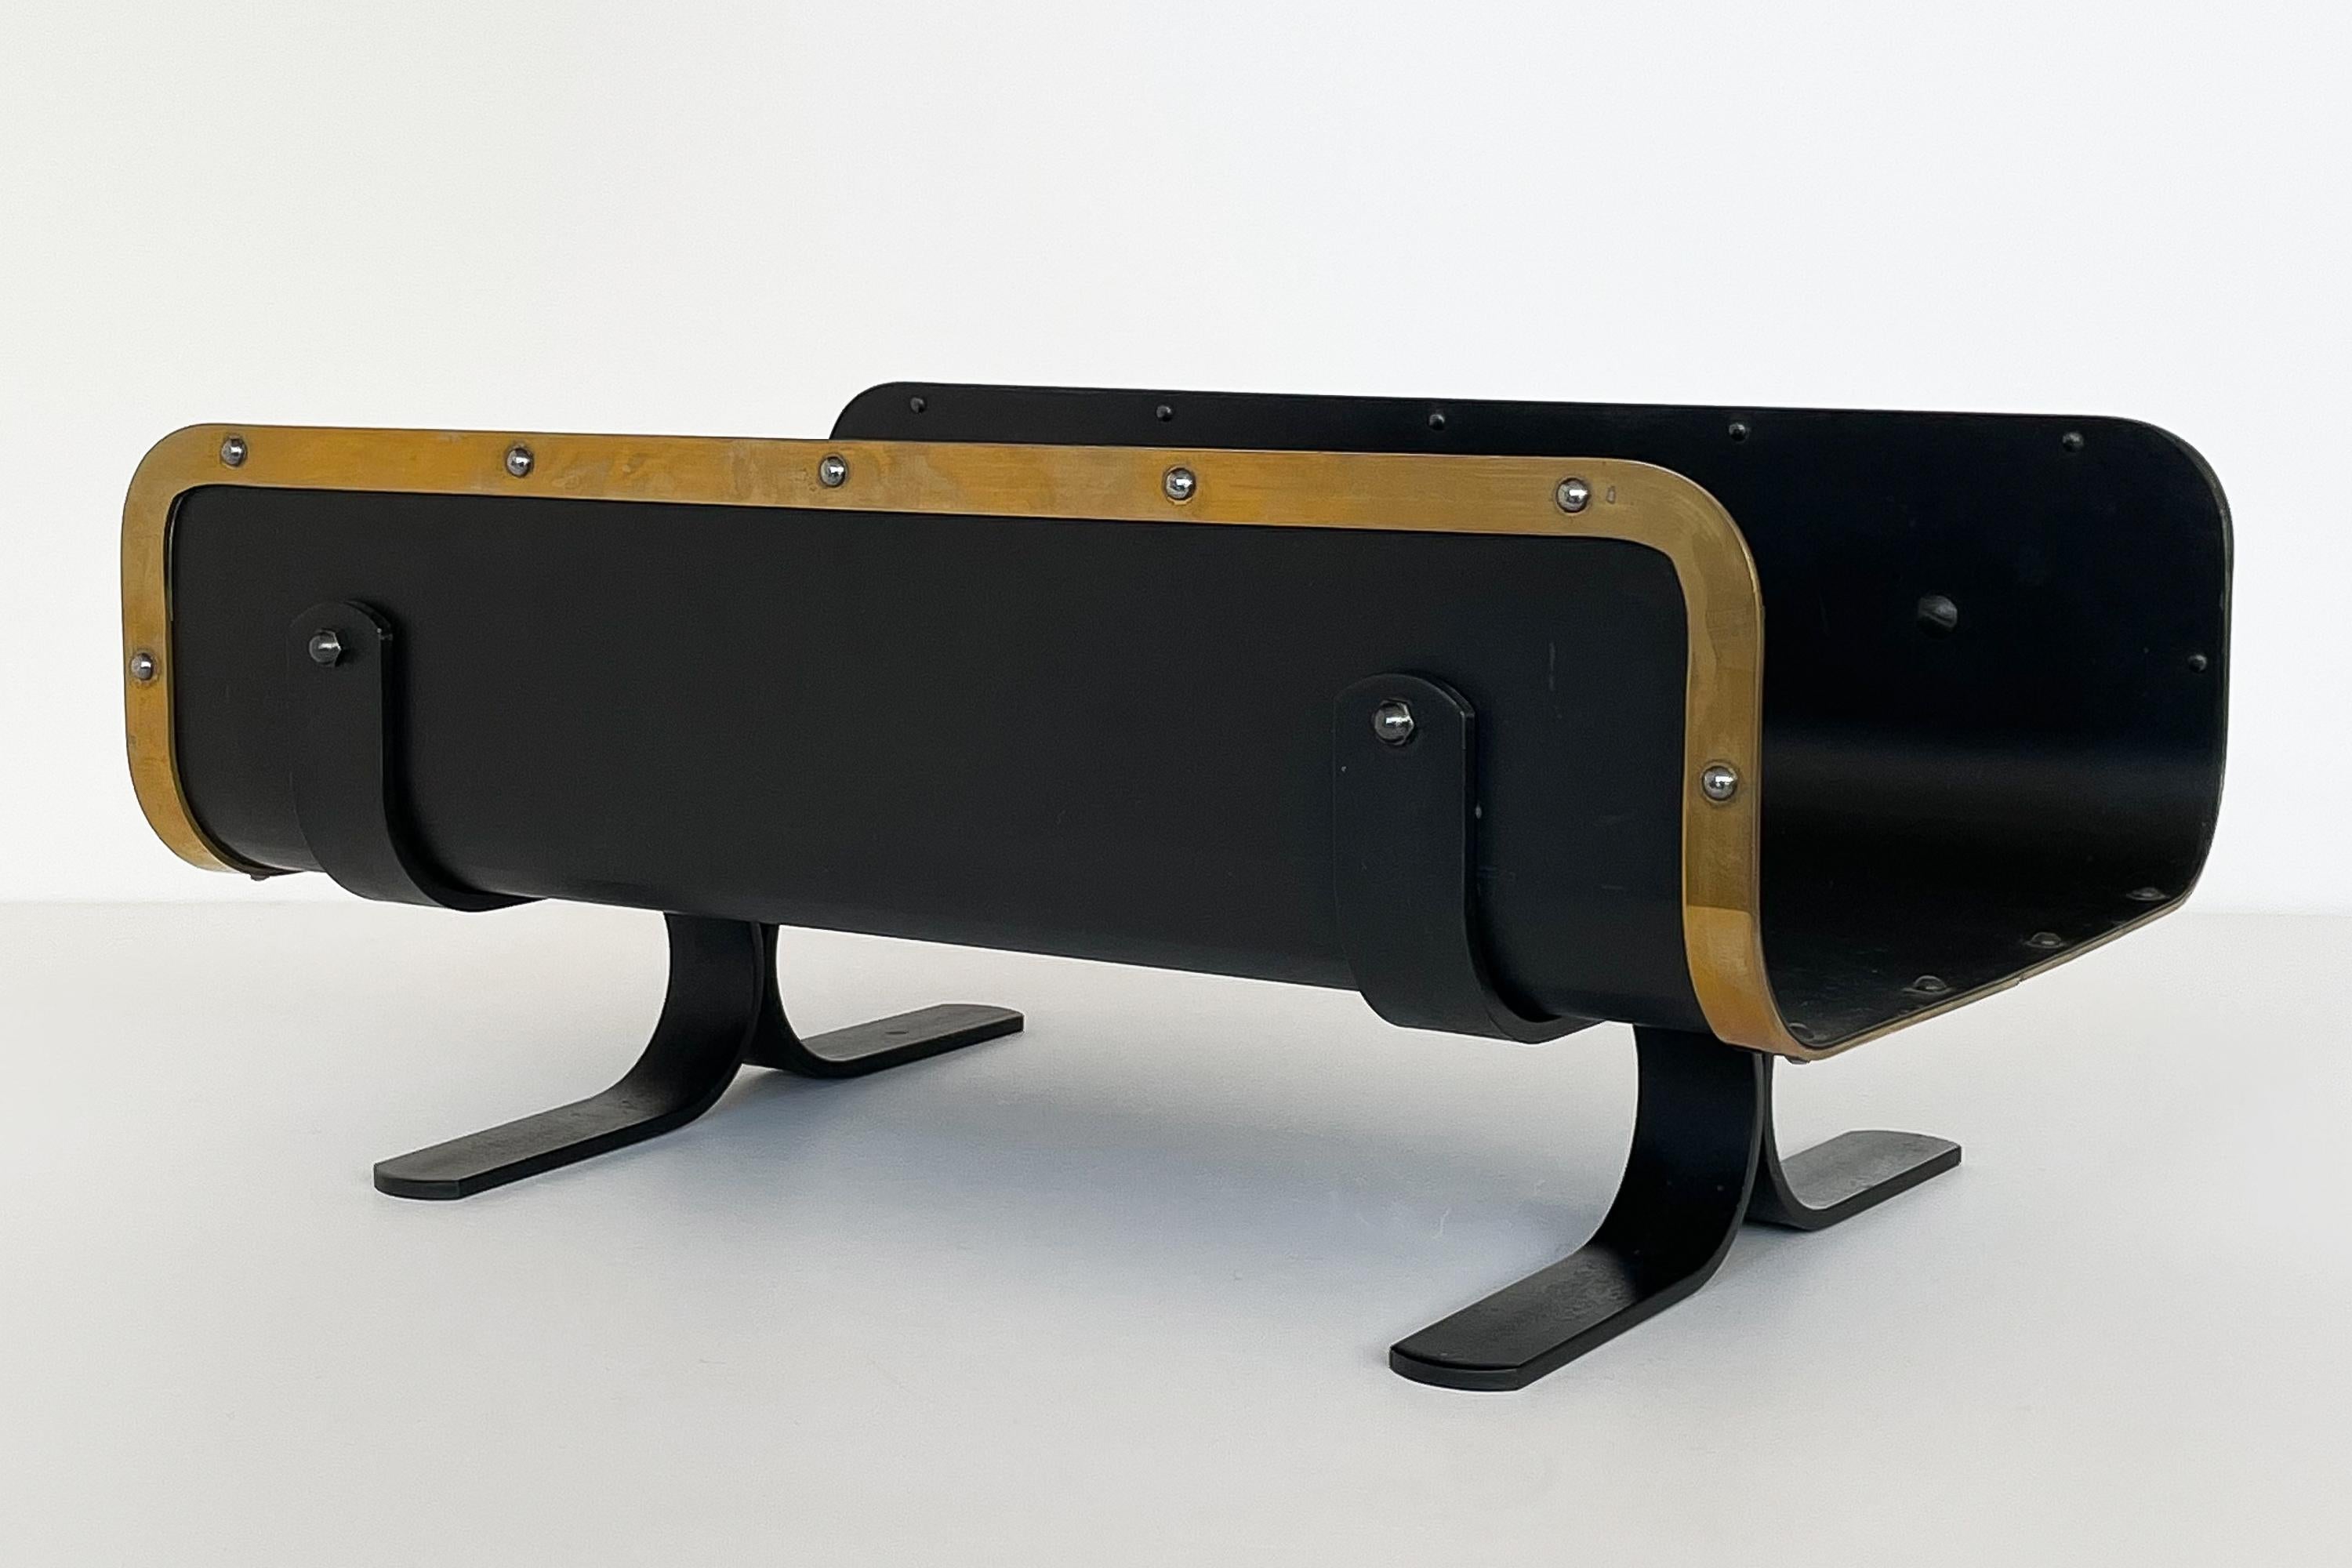 Modernist / mid century log holder with riveted brass edge trim, in the style of Donald Deskey, circa 1960s. Consider using as a magazine rack. Blackened steel and brass with splayed pedestal legs. General patina to brass and slight wear to black